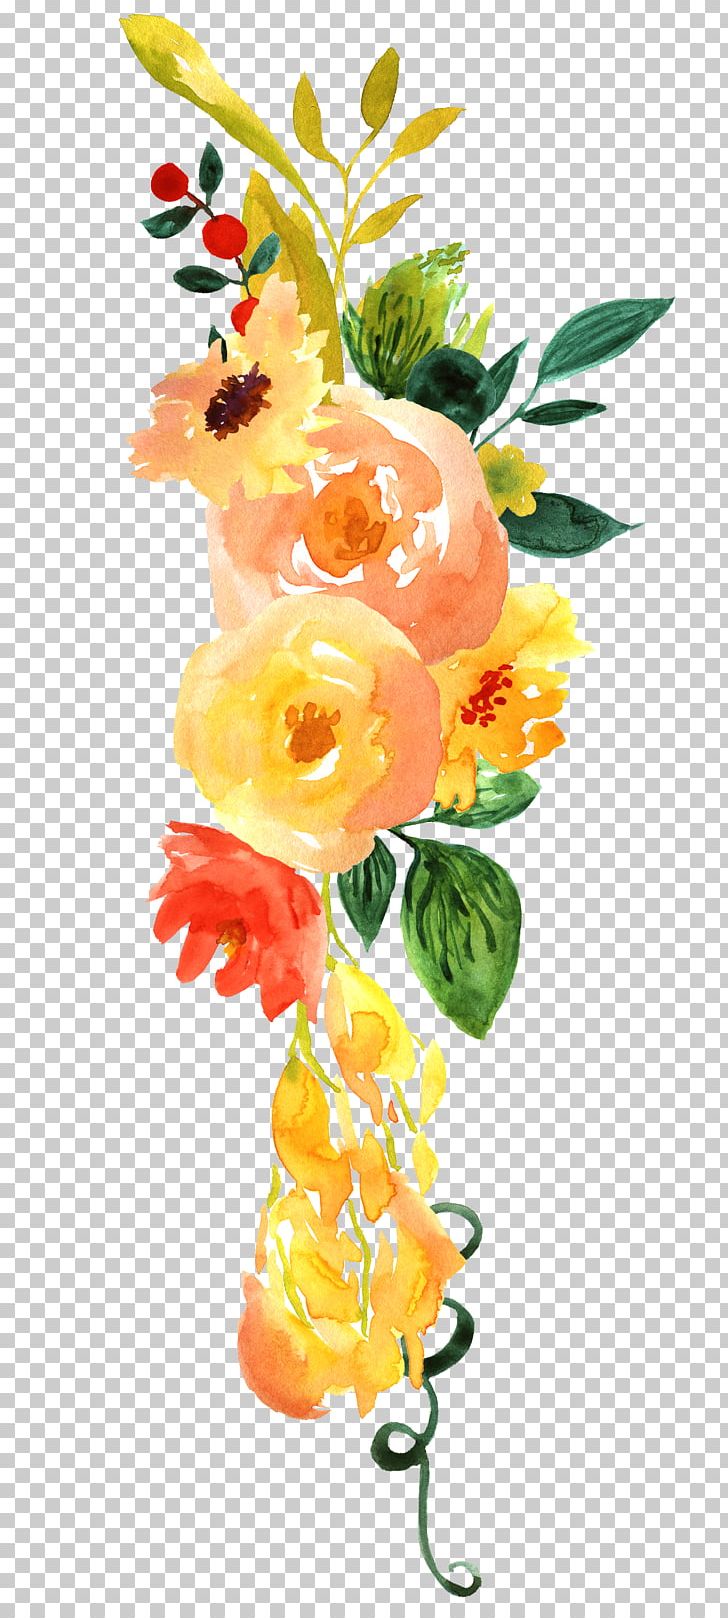 Floral Design Watercolor Painting Flower PNG, Clipart, Bright, Chicken, Color, Cut Flowers, Decorative Free PNG Download